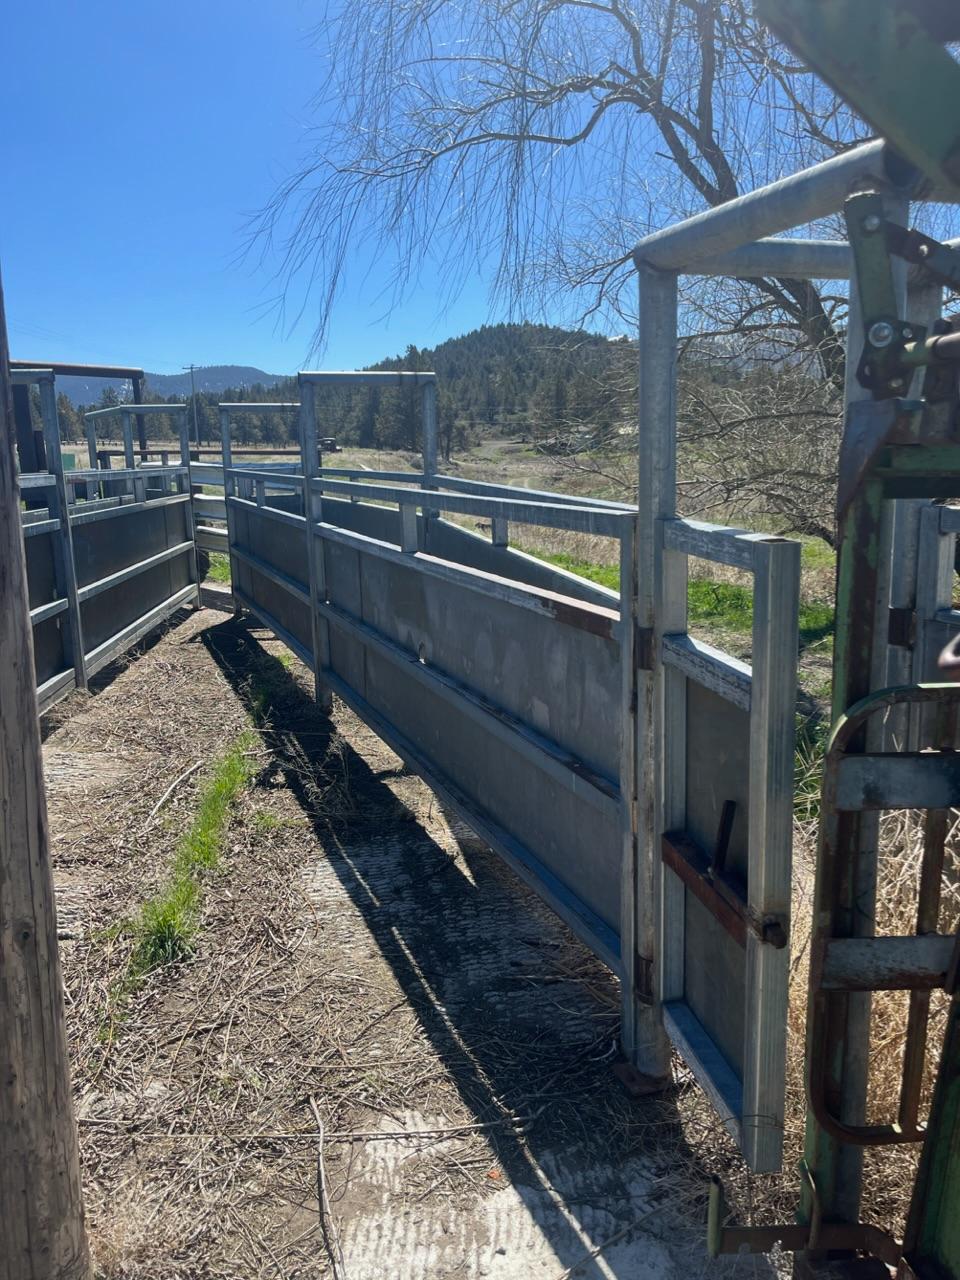 Cattle chute and lead up